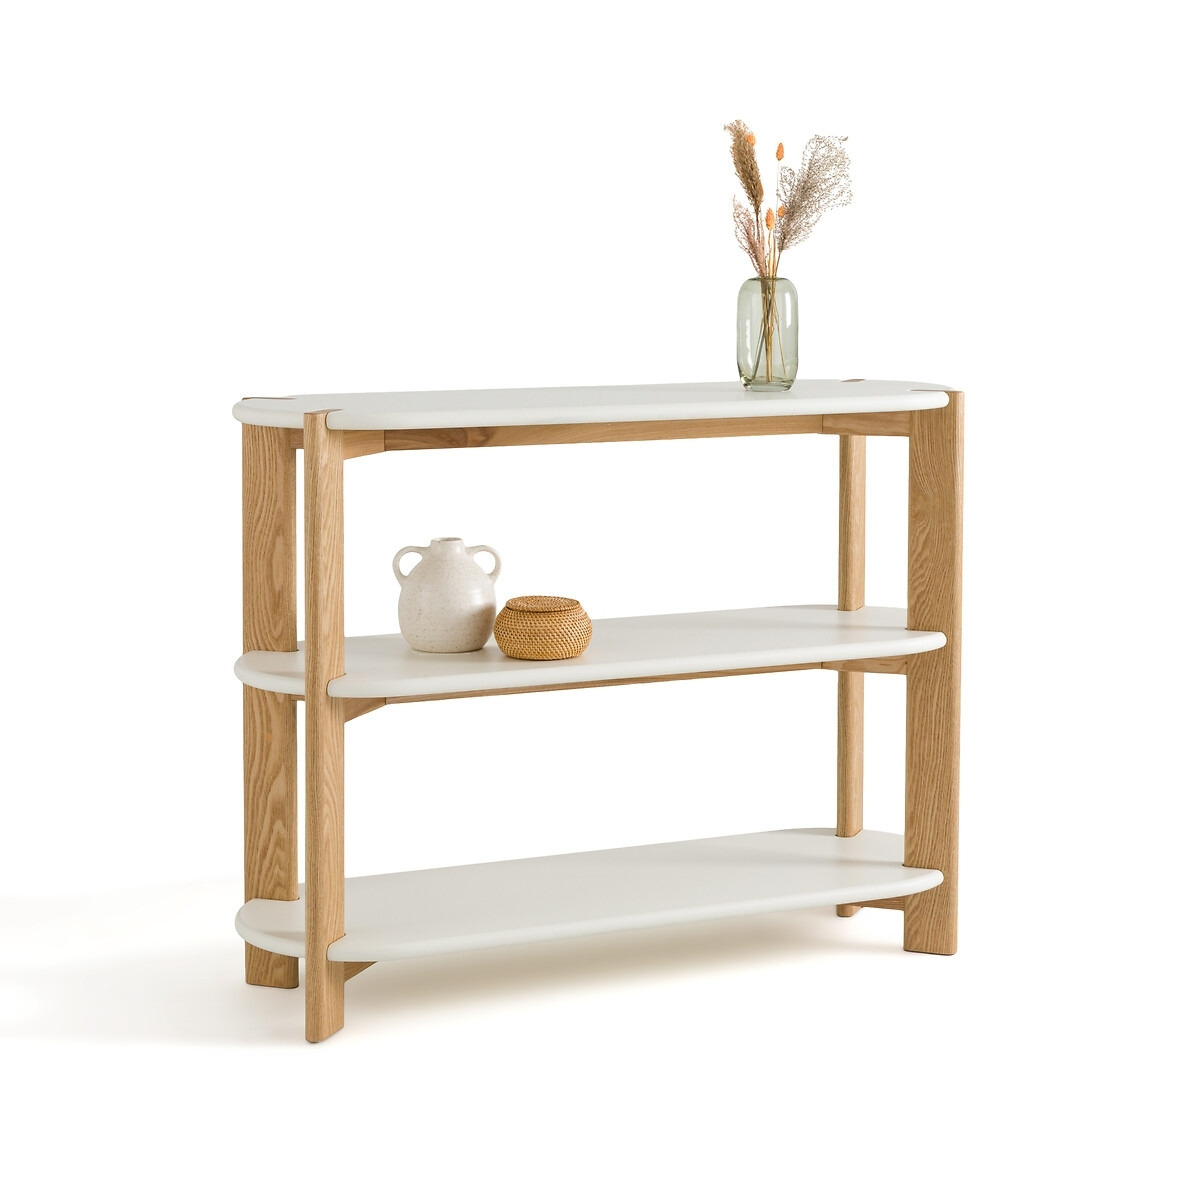 Galet Organically Shaped Ash Console Table - image 1